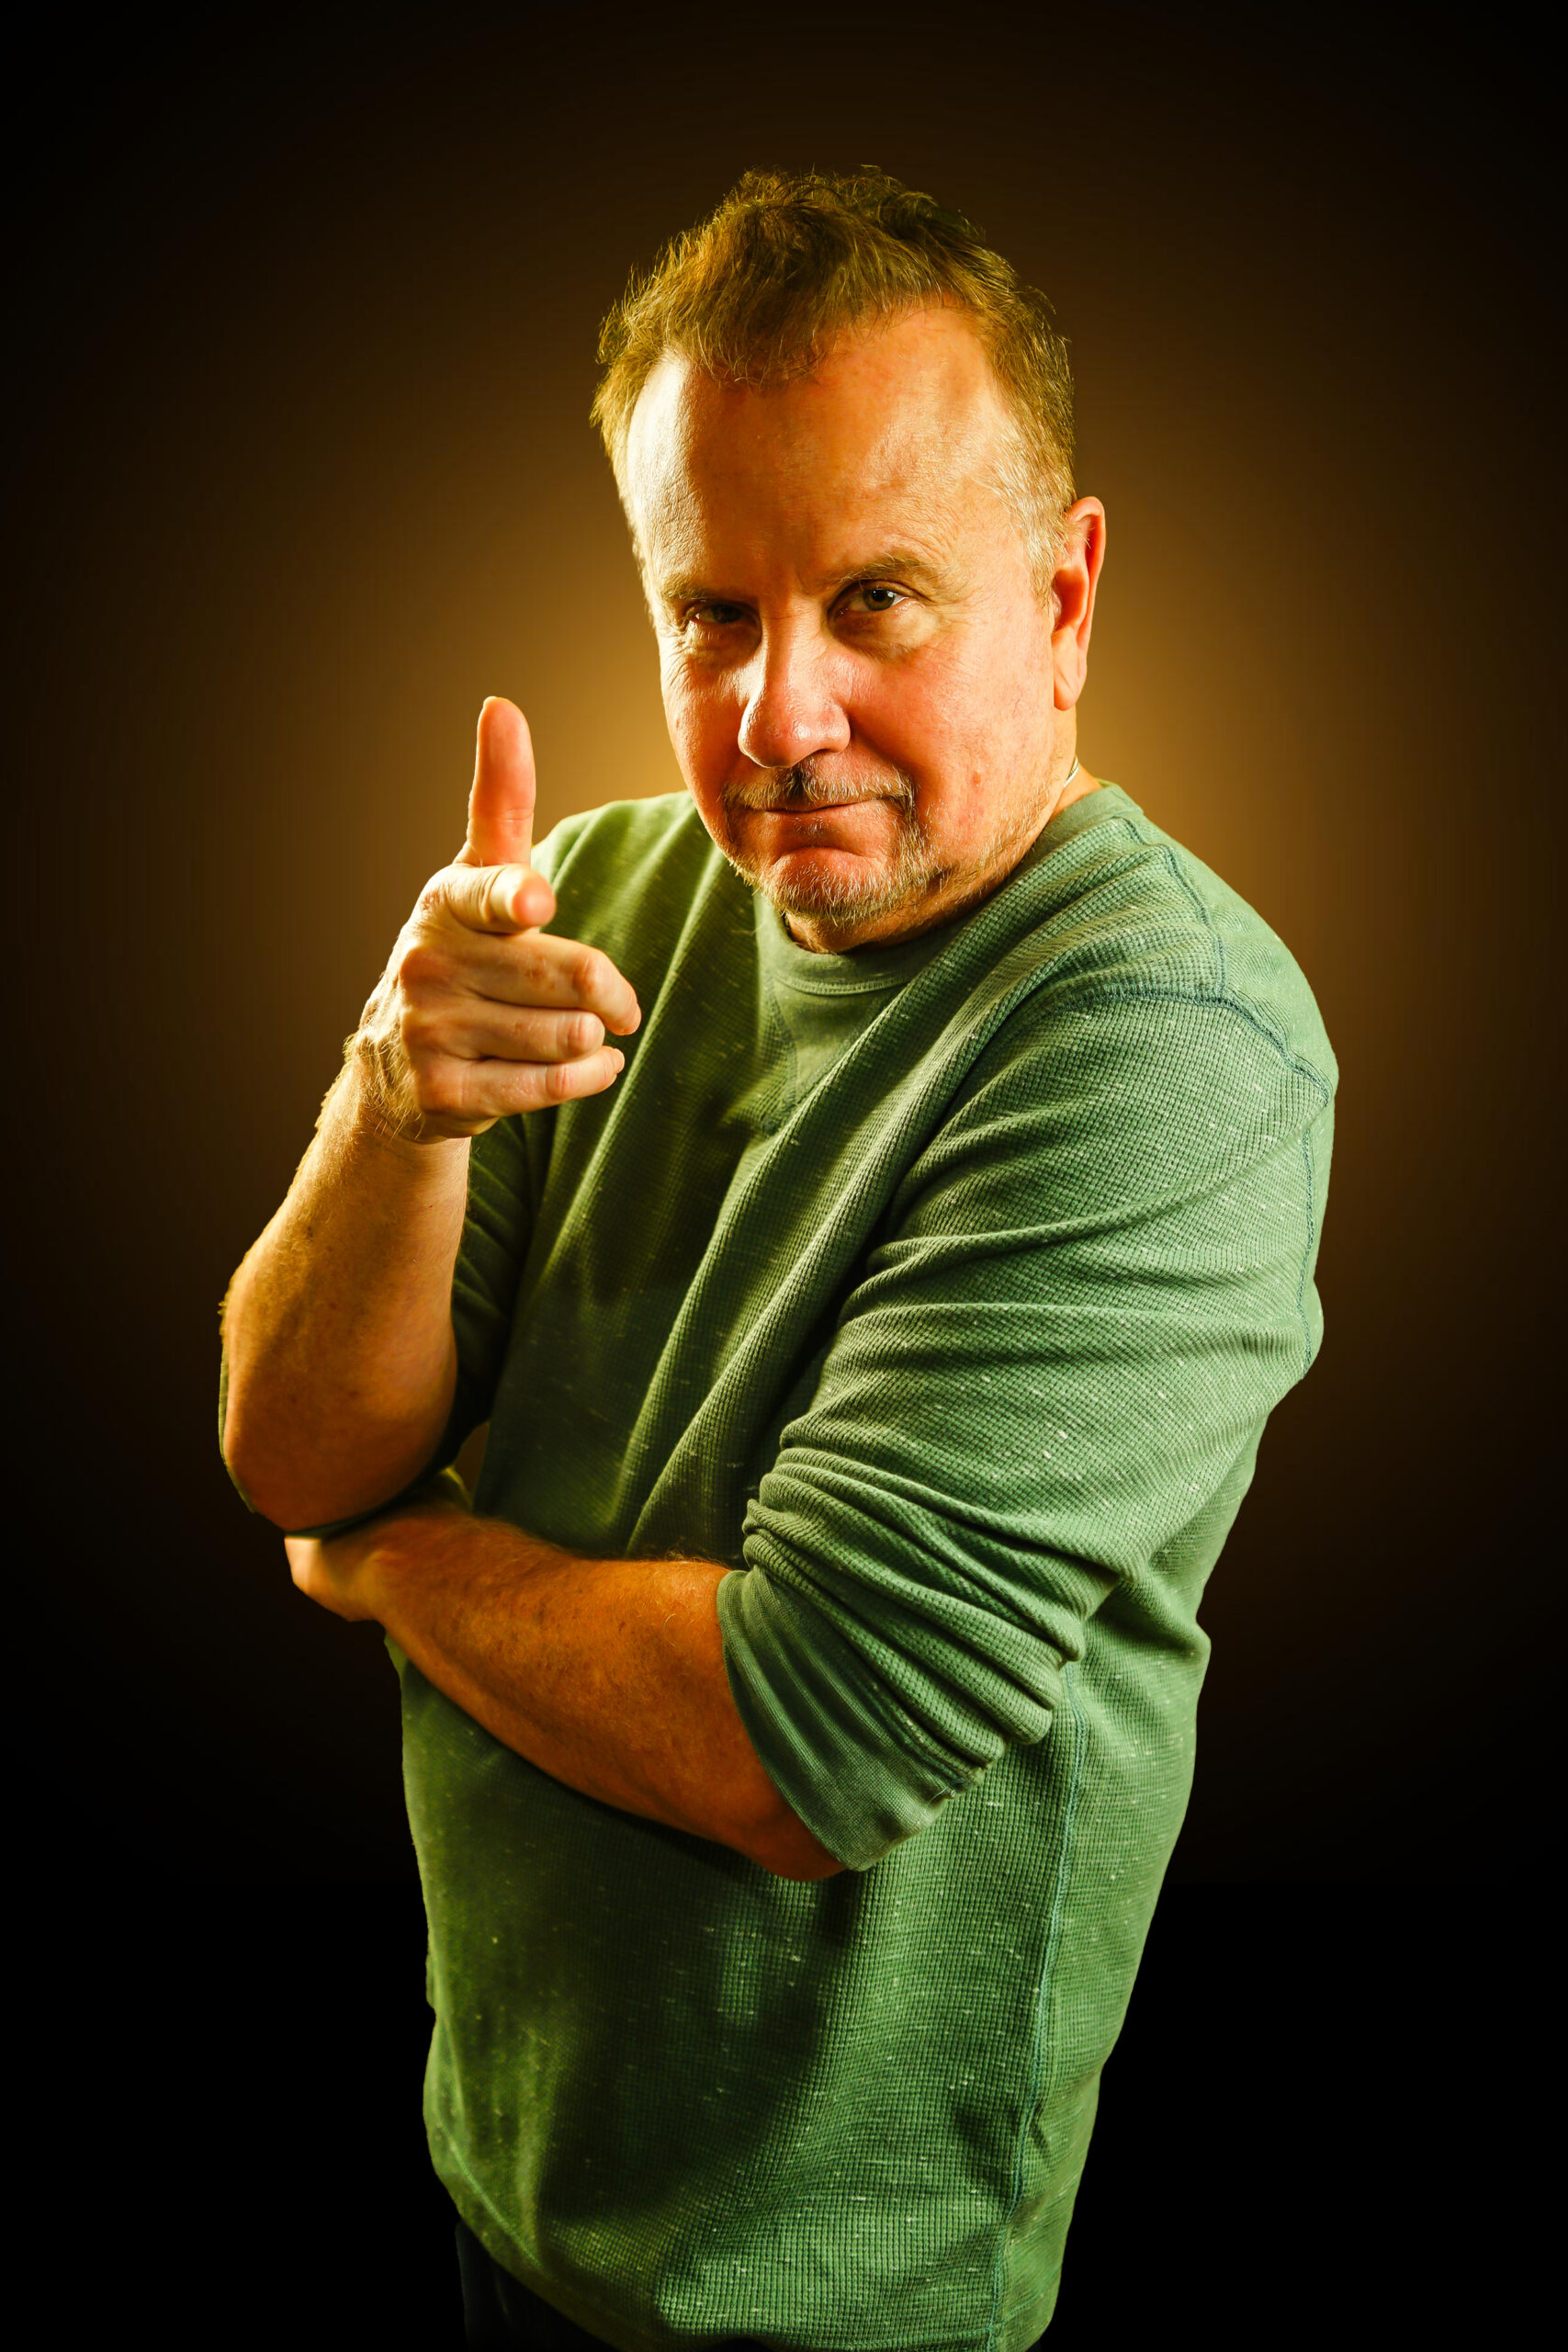 Stand-up comedian Mike Rivera in a green shirt